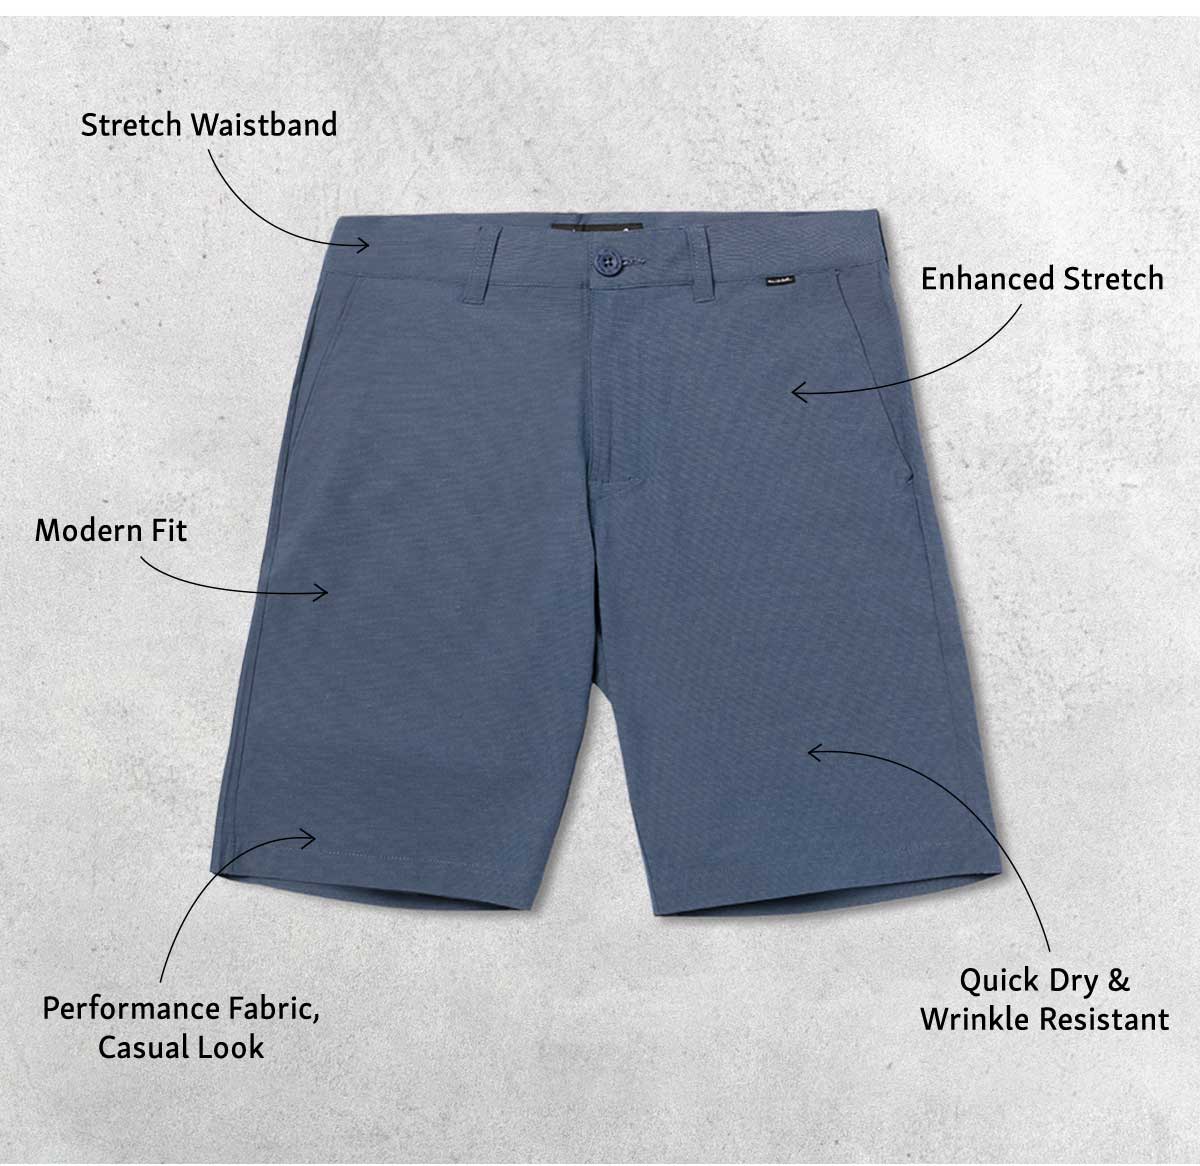 Stretch Waistband Enhanced Stretch Modern Fit Quick Dry Performance Fabric, Wrinkle Resistant Casual Look 